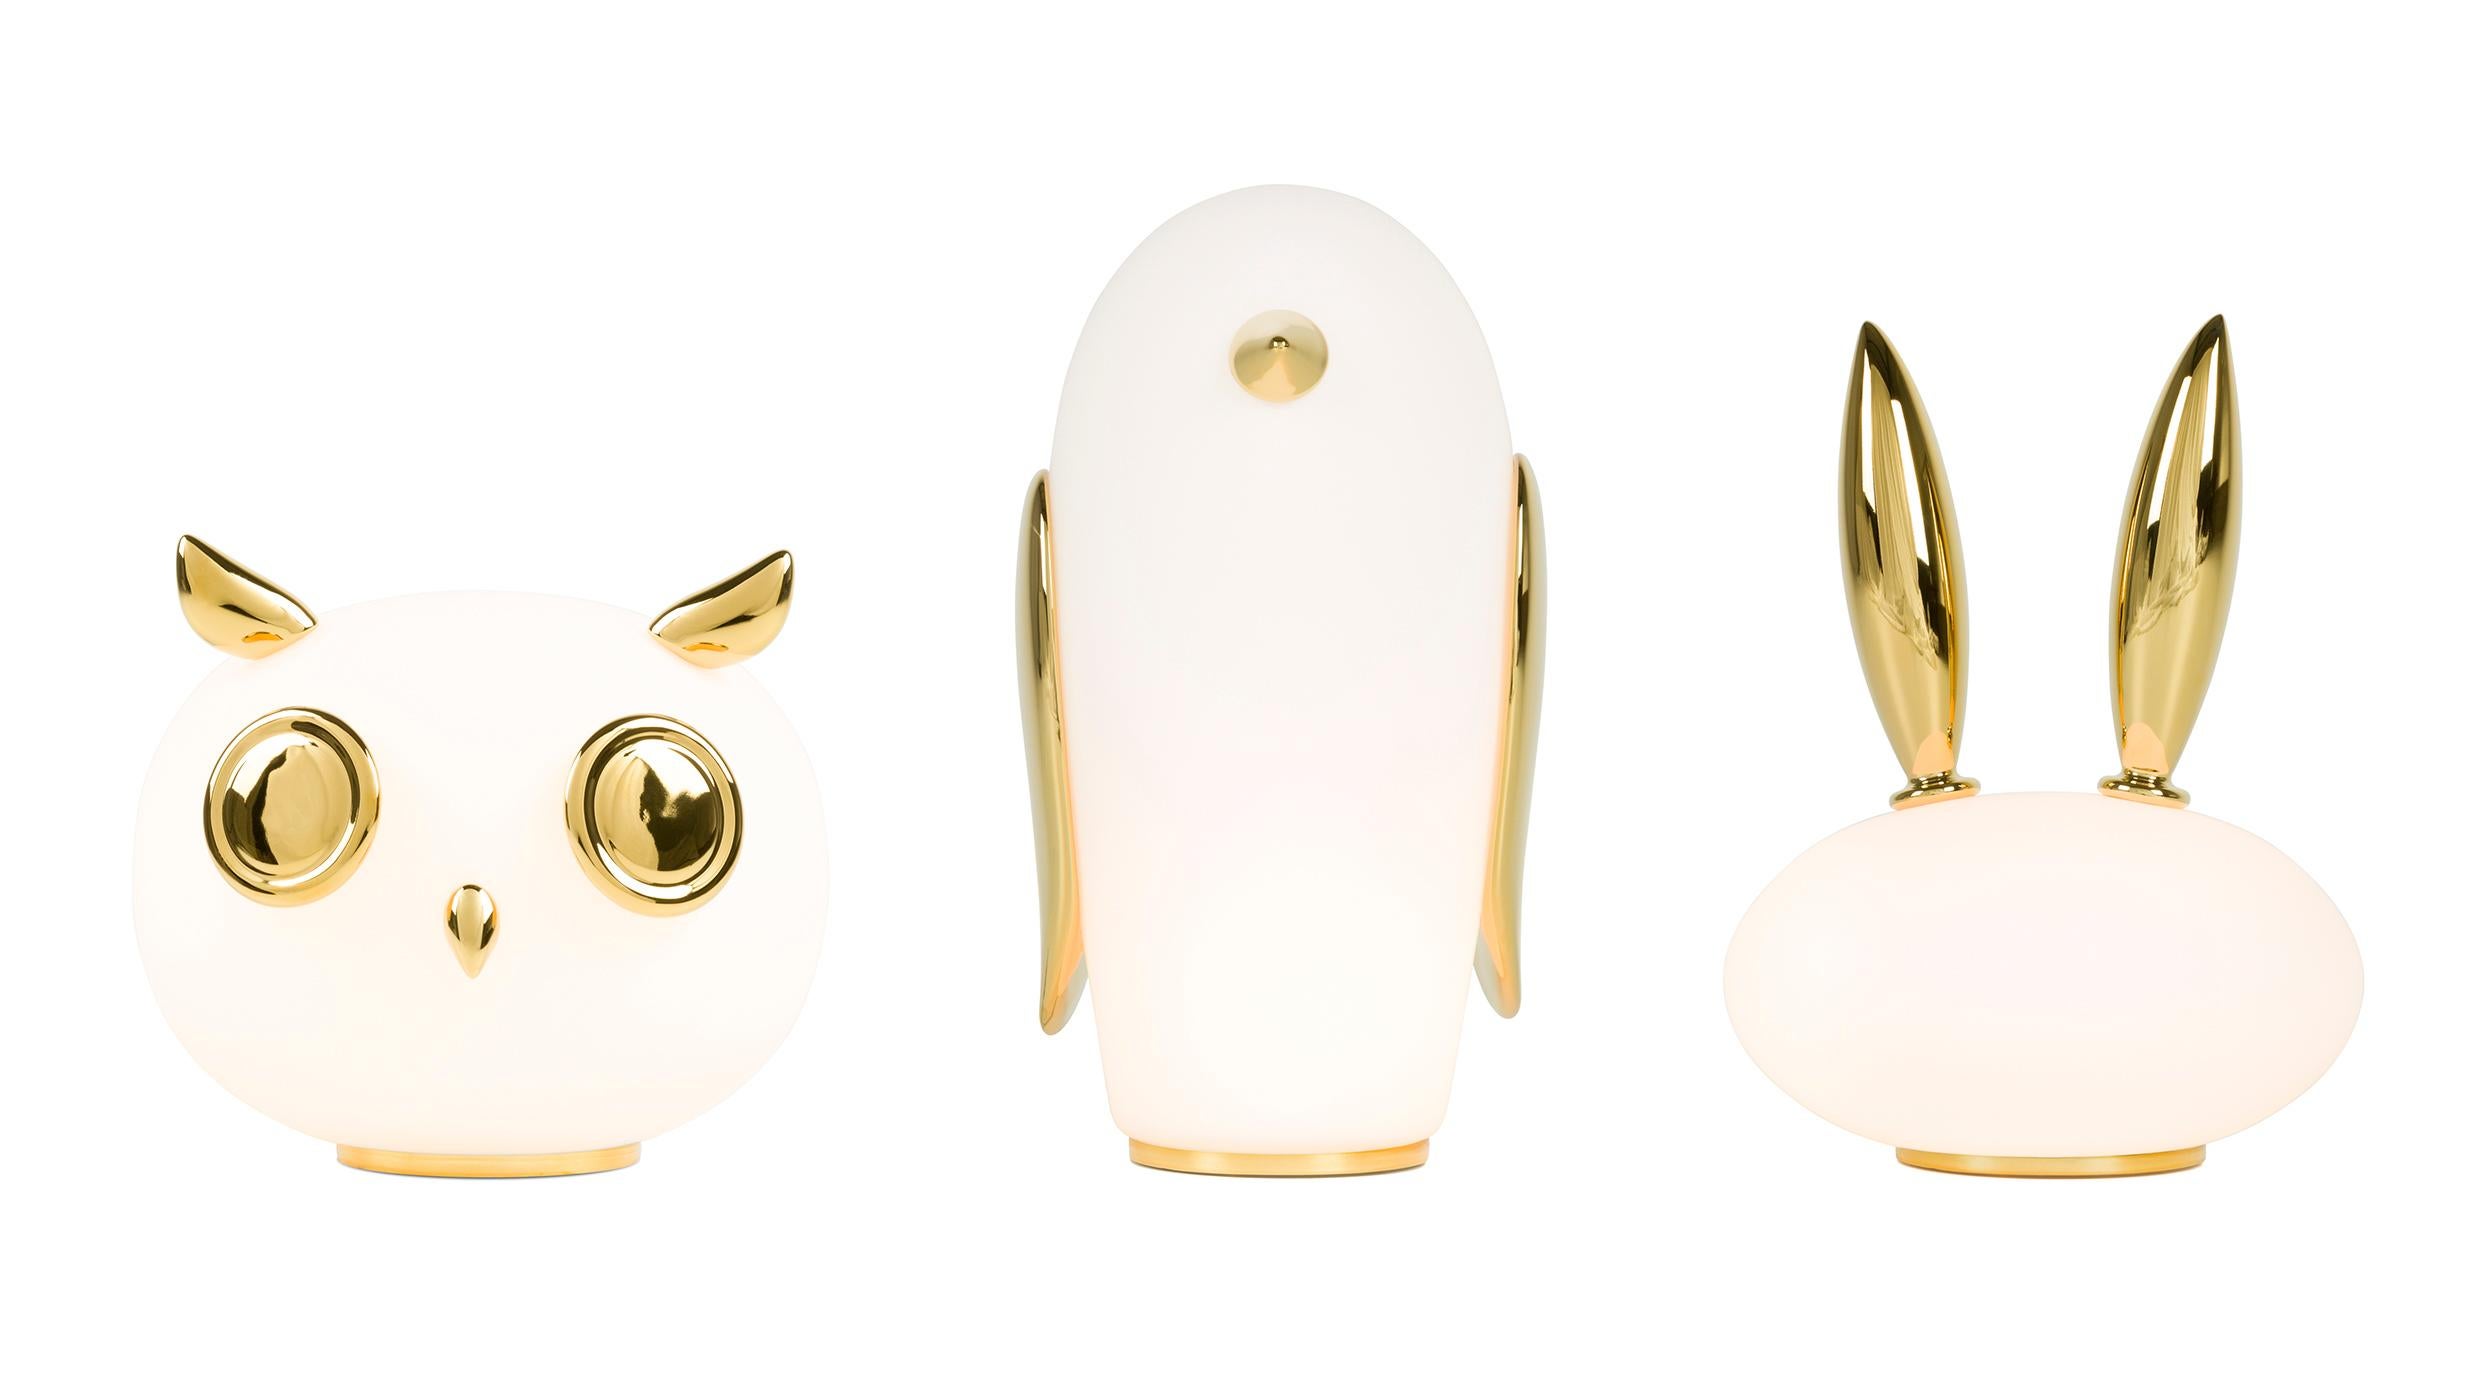 Uhuh, Purr & Noot Noot (owl, rabbit & penguin) are a series of table lamps by Marcel Wanders with their very own personalities and characteristics. They are produced in white opal glass with ornamentation in gold painted ceramic. The Lamps are